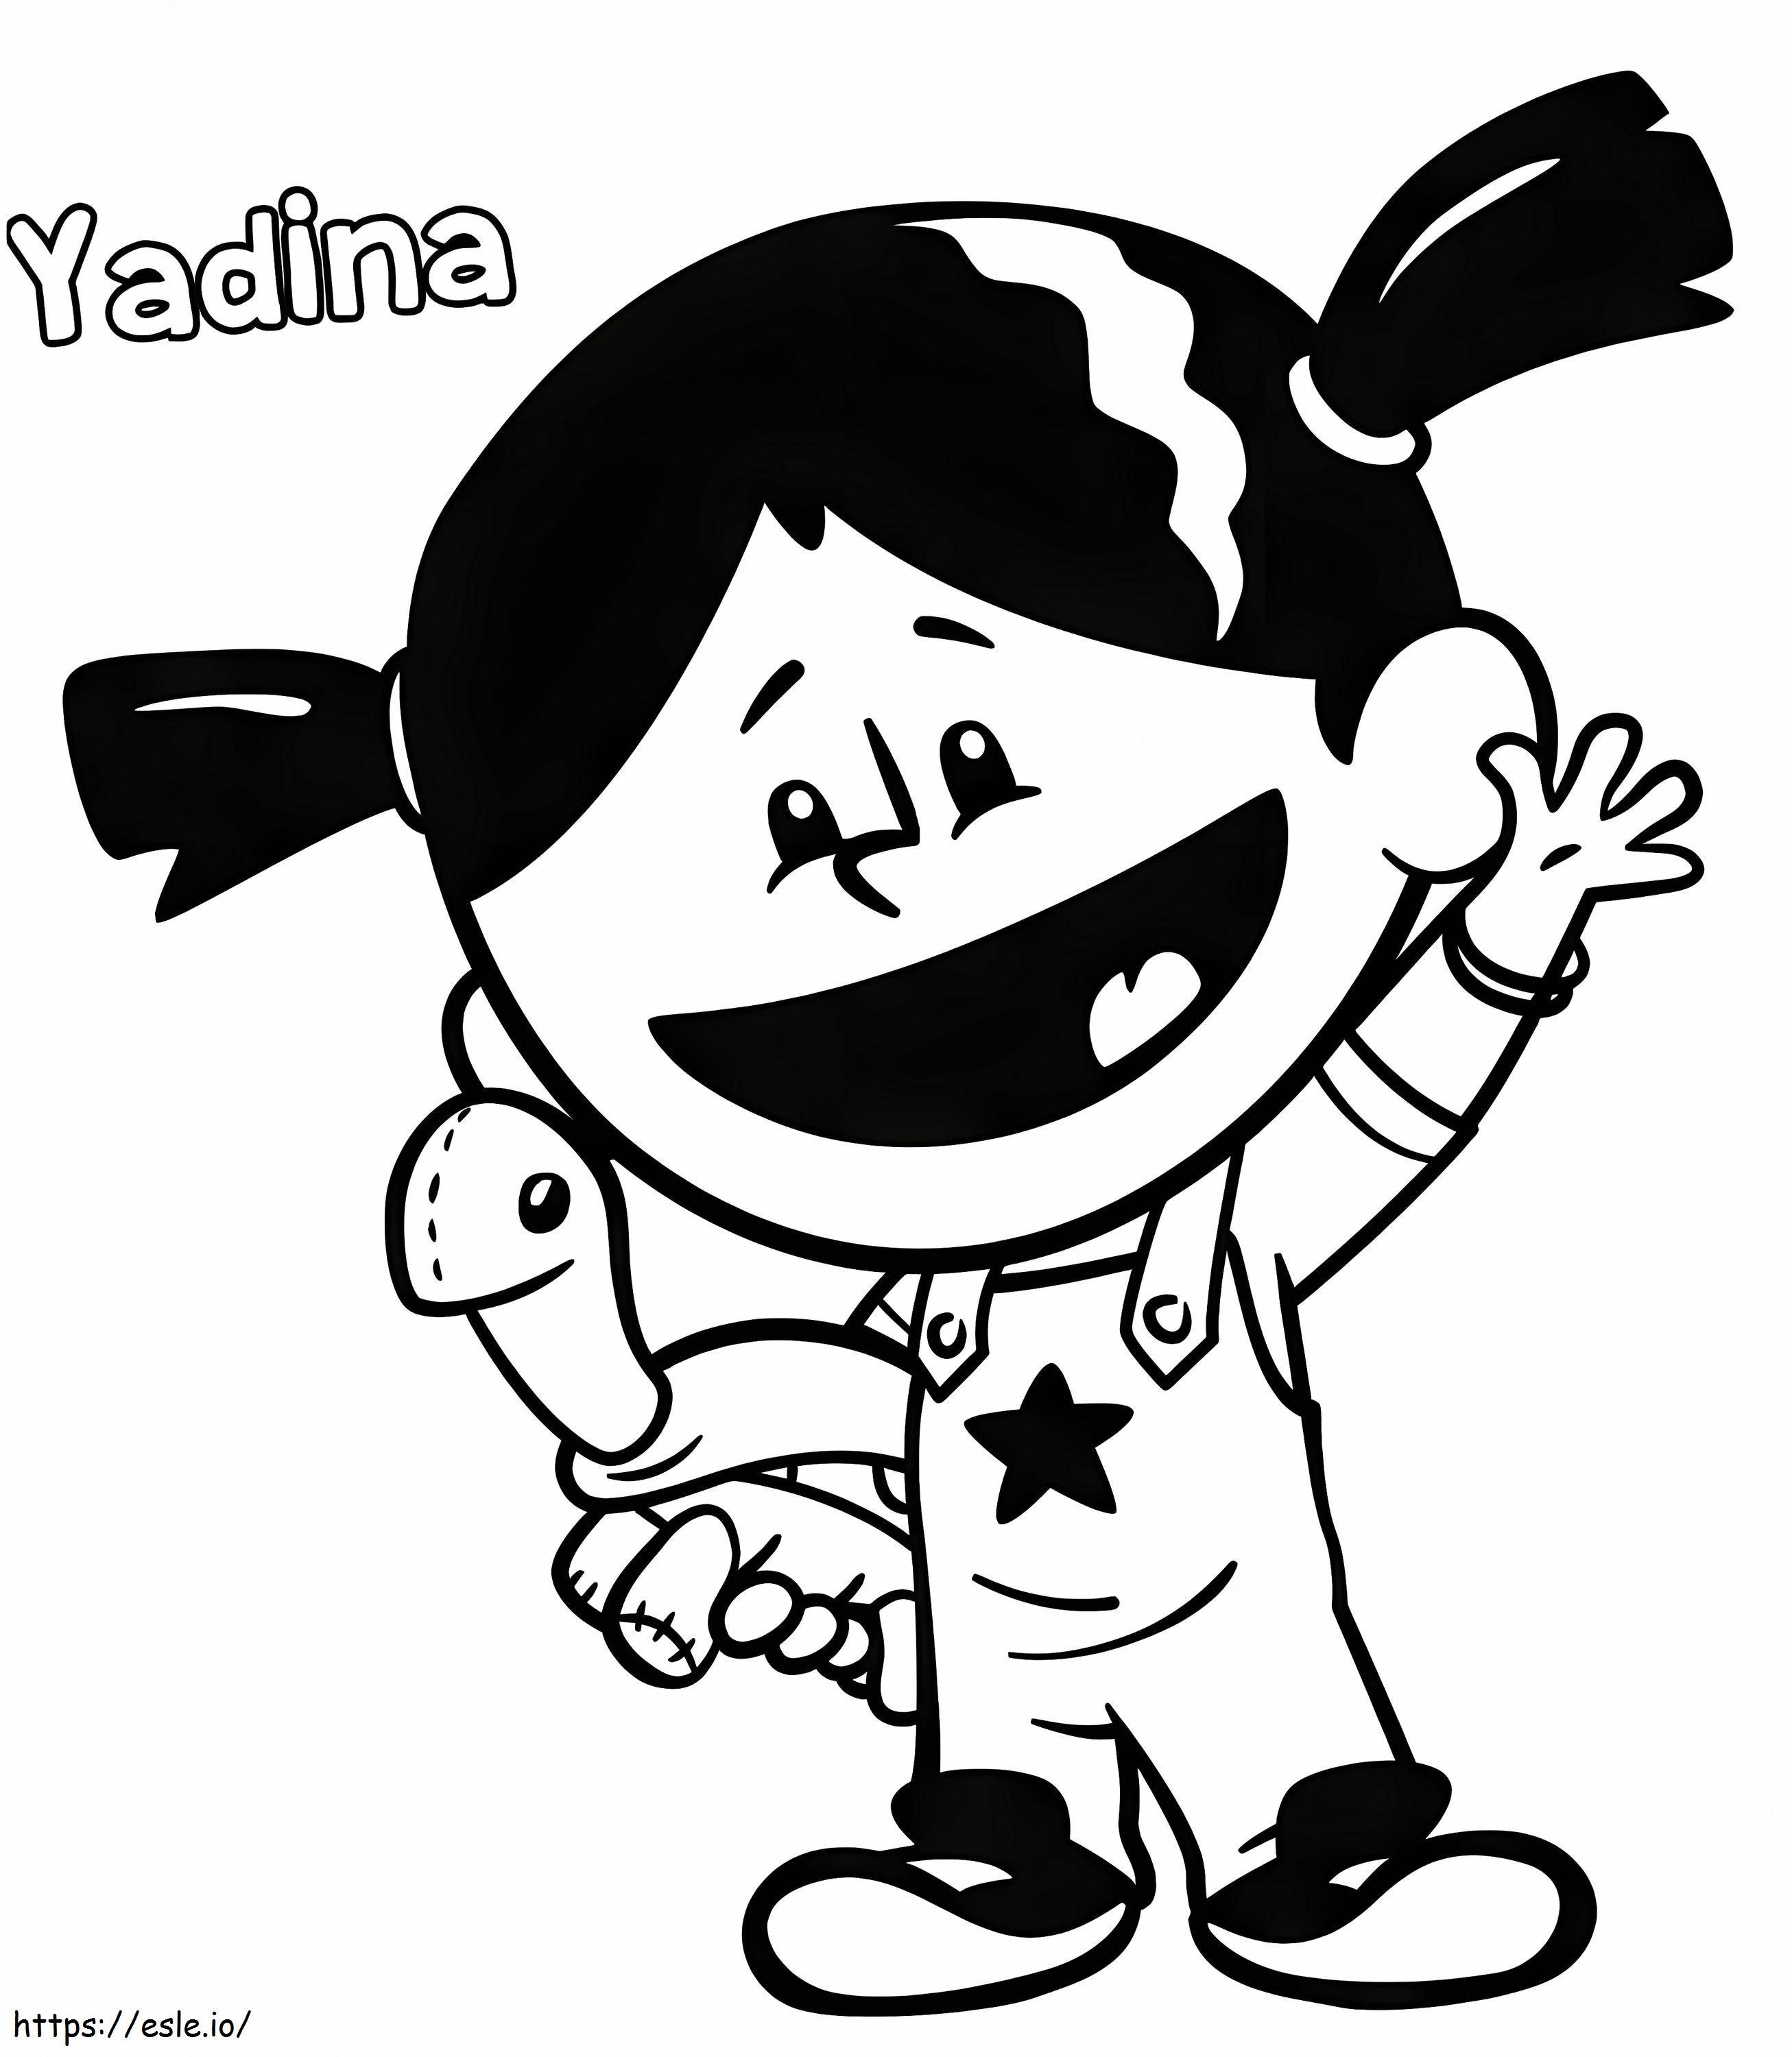 Yadina And Dr. Zoom coloring page